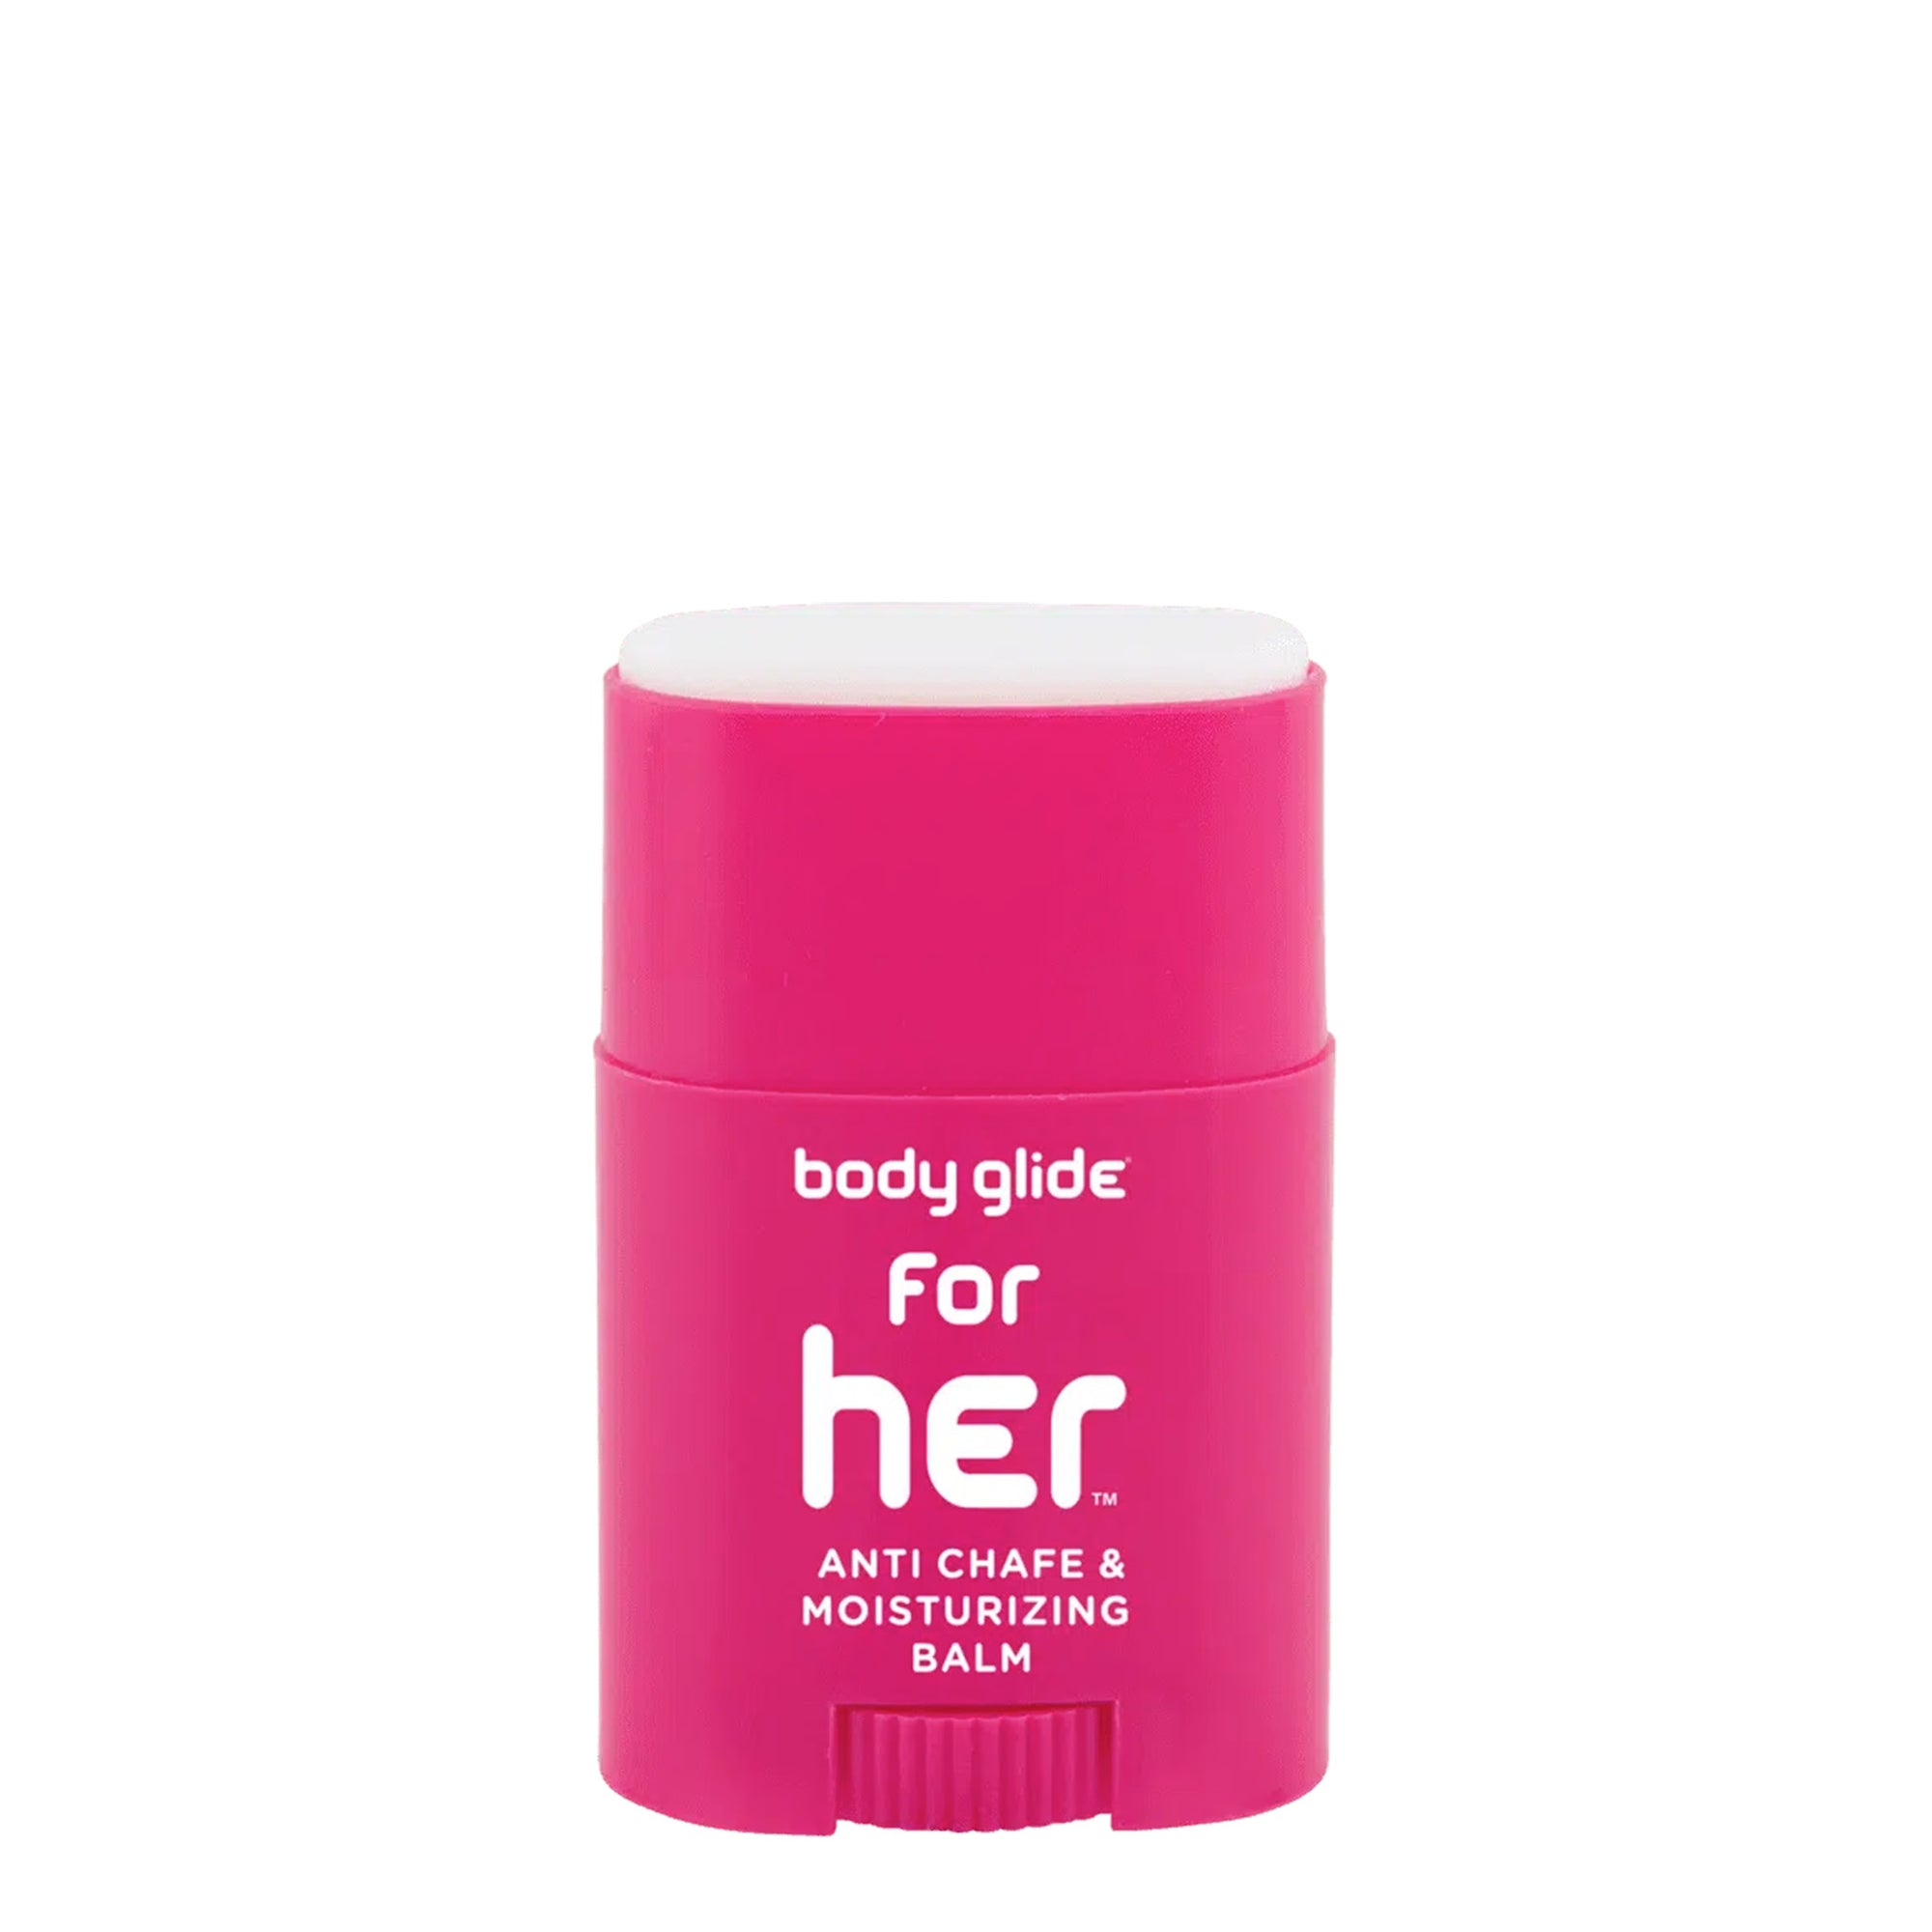 BODY GLIDE FOR HER